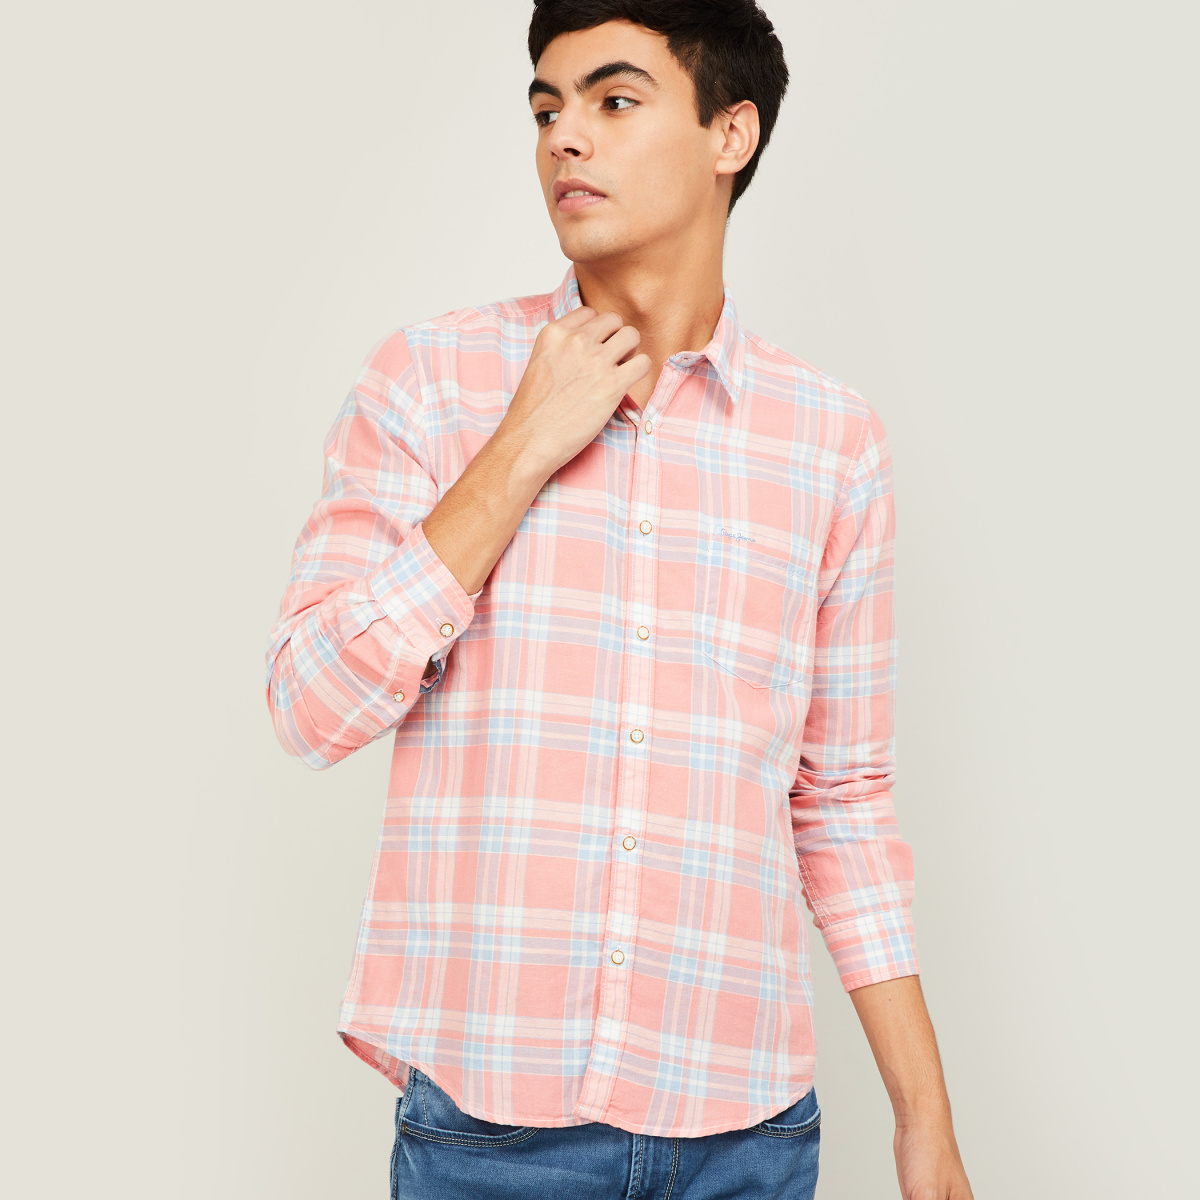 Pepe Jeans Men's Checkered Regular Shirt (PM307595_Red M) : Amazon.in:  Clothing & Accessories